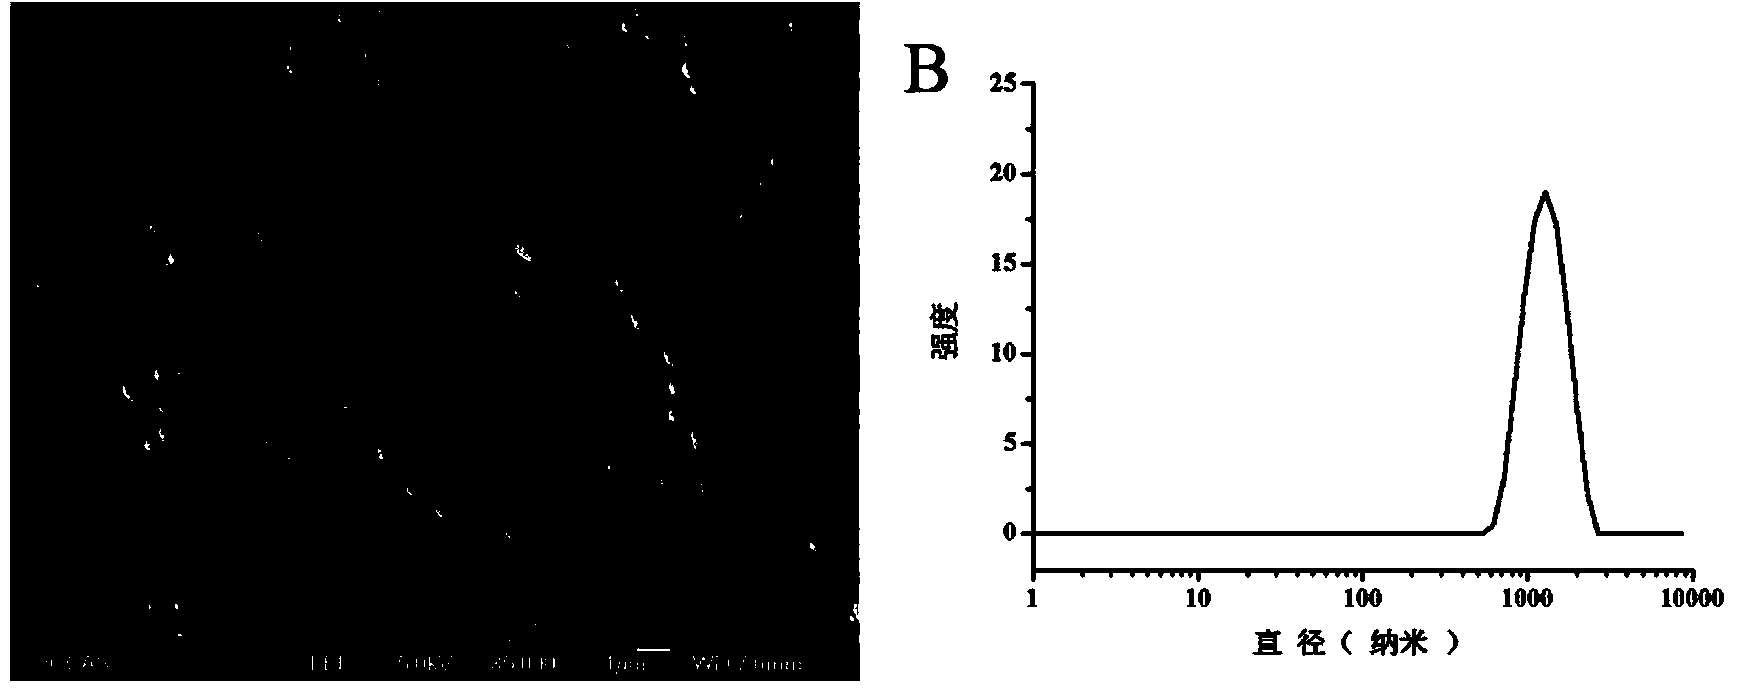 Method for preparing starch micro-capsules and microballons on basis of fast membrane emulsification method